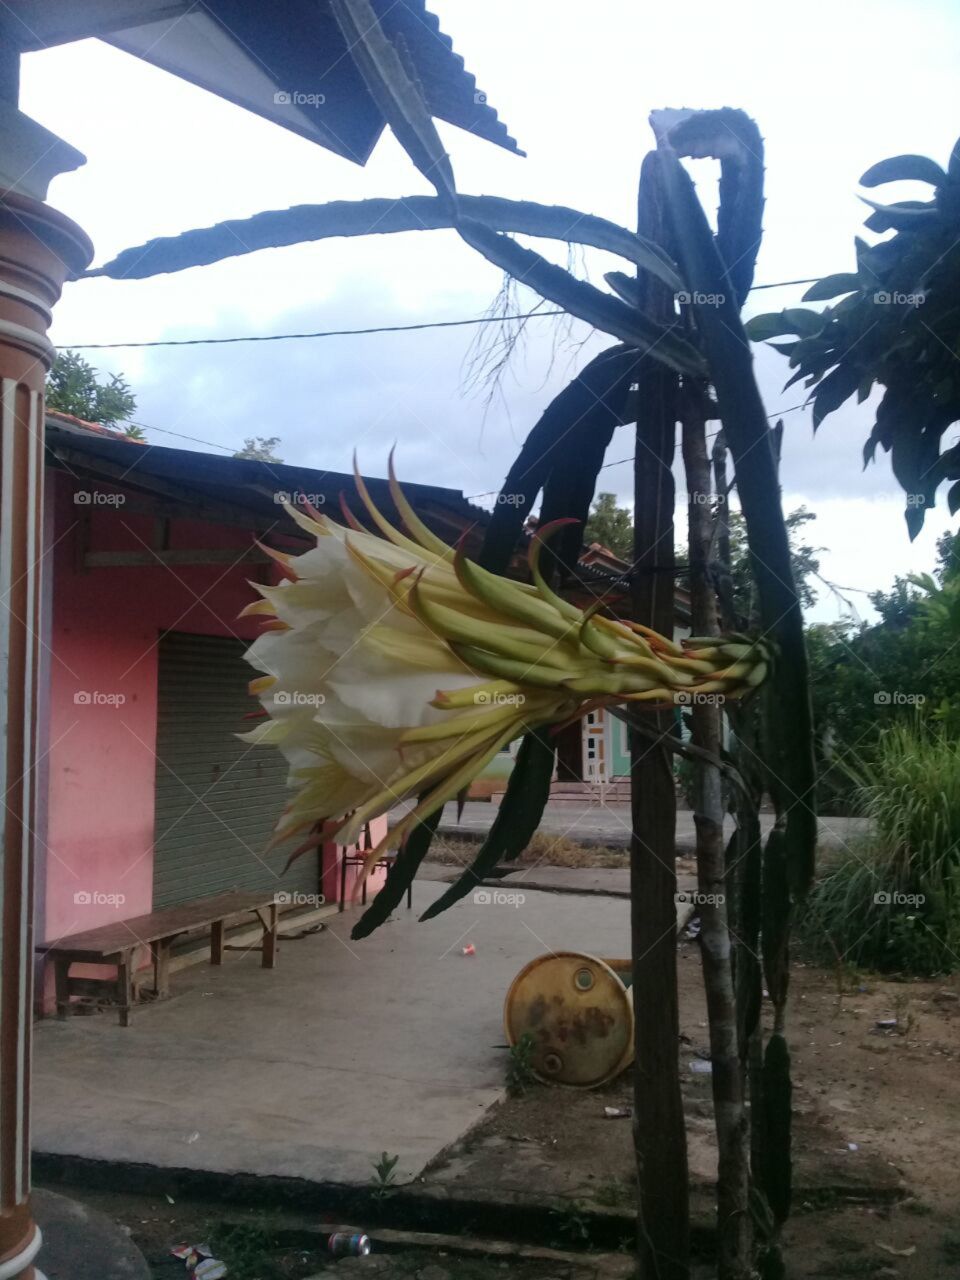 Fruit dragon flower, like this is a flower fruit dragon, this is photo I take in the outdoor frome people house in the small garden